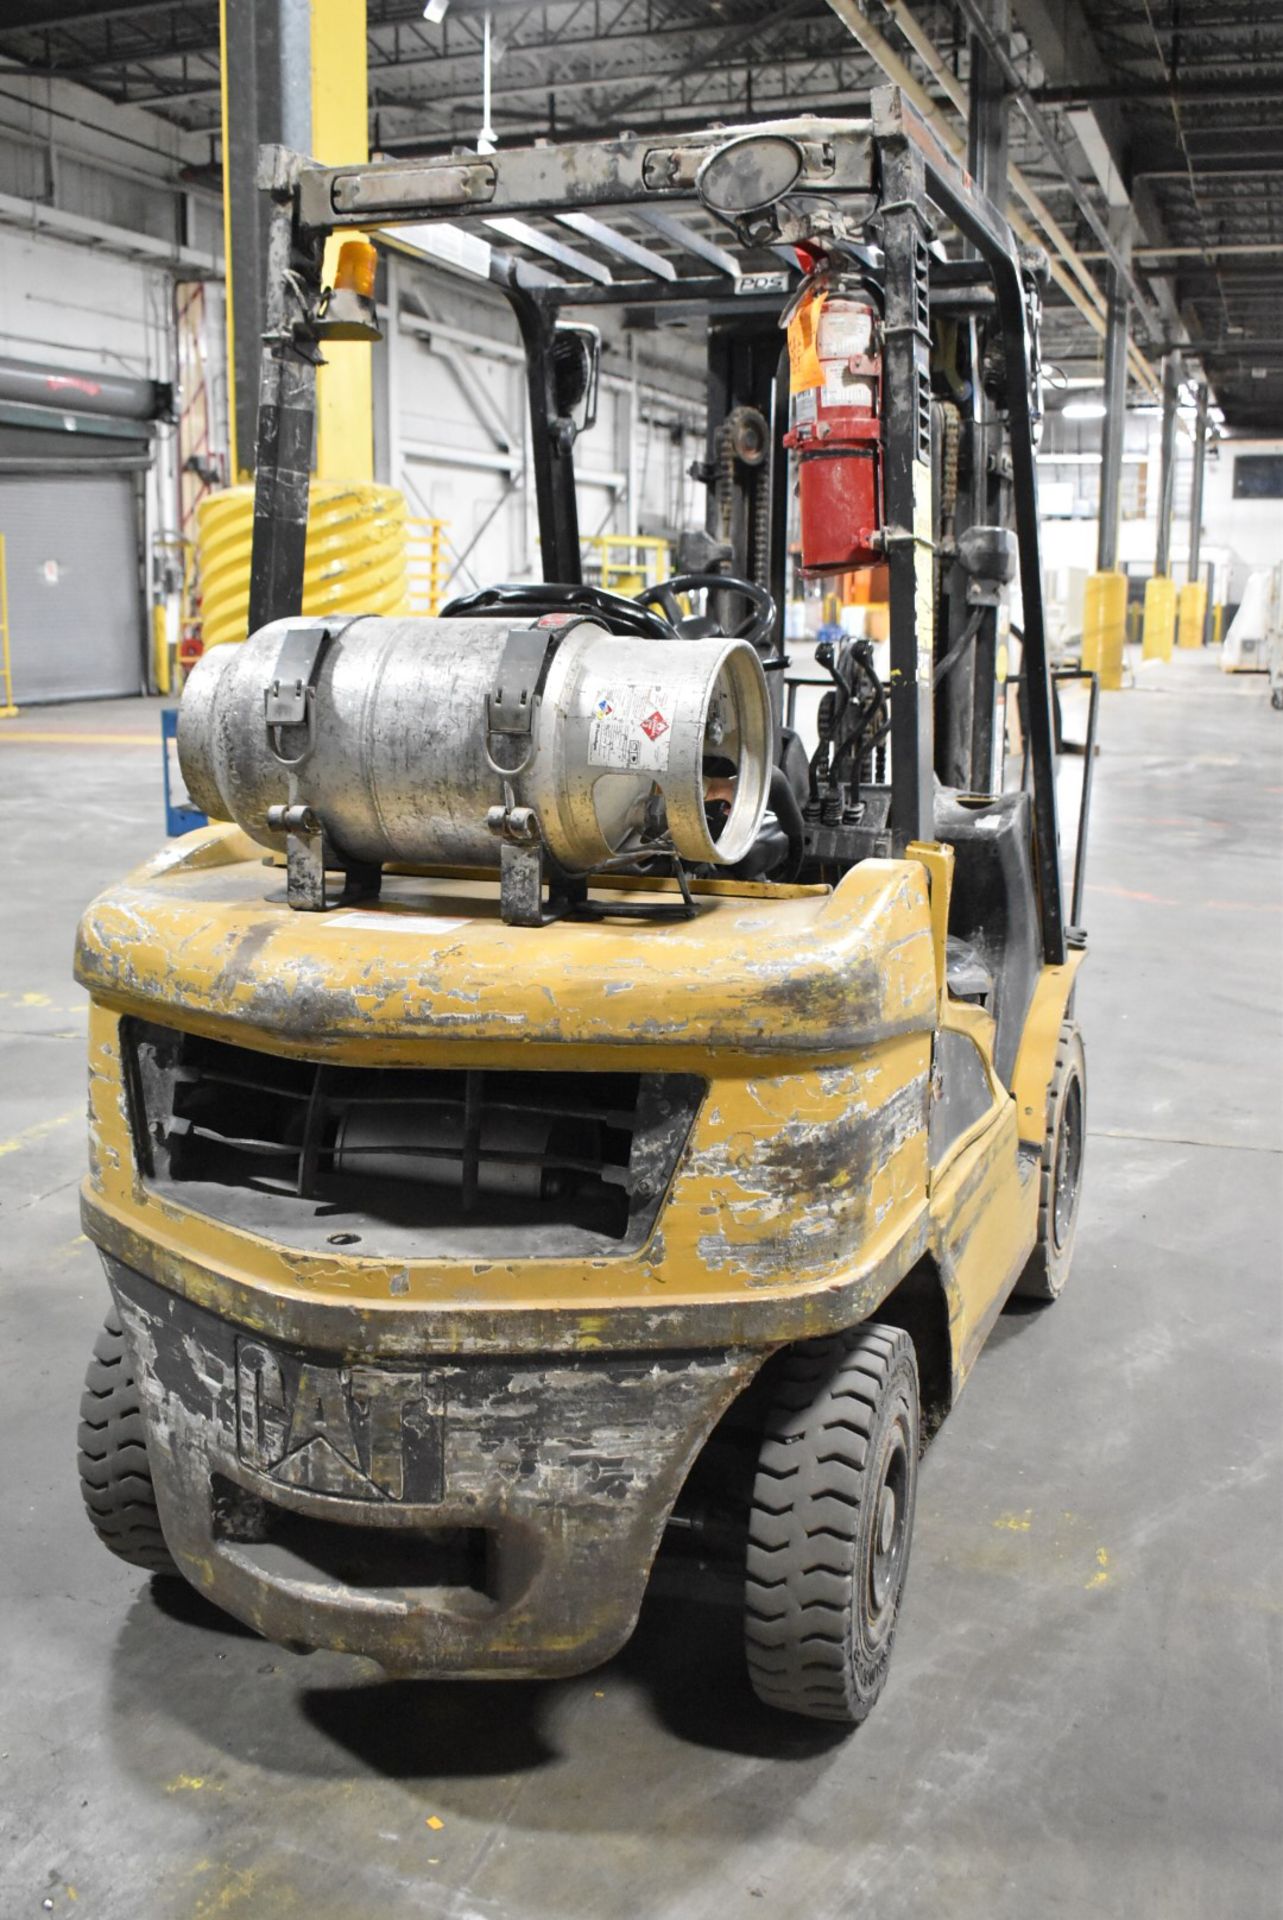 CATERPILLAR P5000-LP 4,500 LBS. CAPACITY LPG FORKLIFT WITH 188" MAX VERTICAL REACH, 3-STAGE HIGH - Image 4 of 7